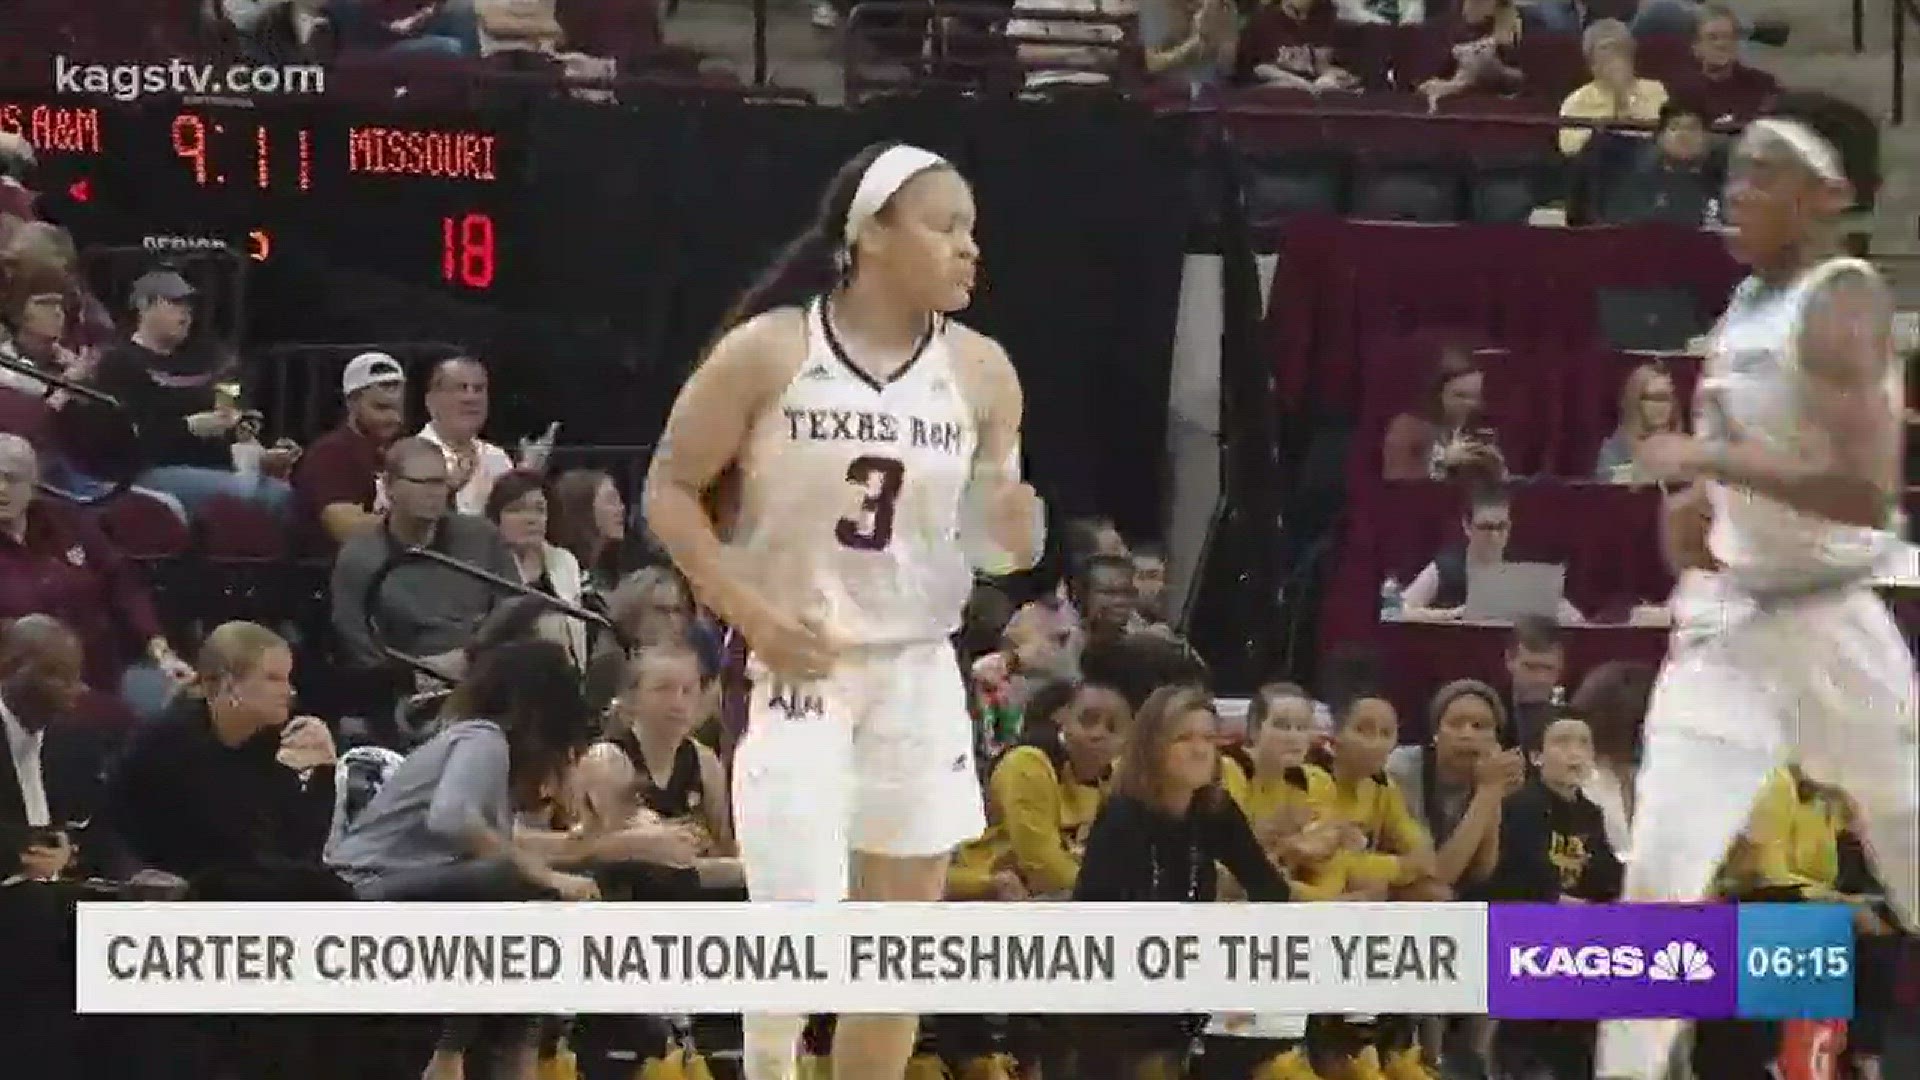 Texas A&M's Chennedy Carter picked up National Freshman of the Year honors from USA Today on Wednesday.